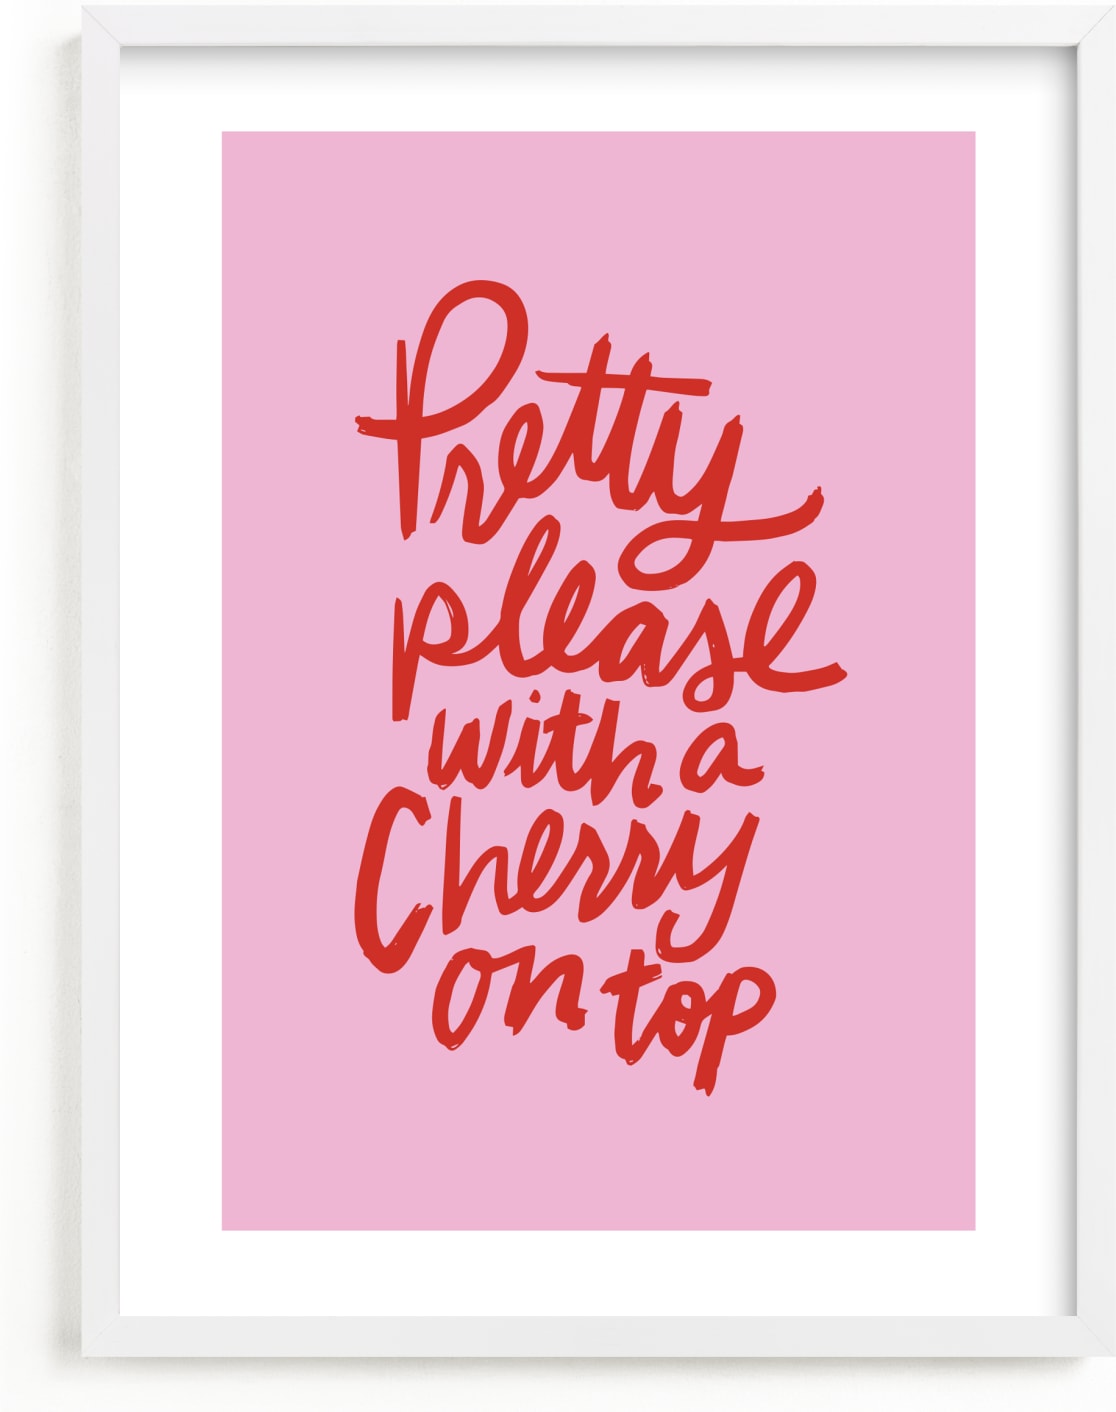 This is a pink kids wall art by Inkblot Design called Cherry on Top.